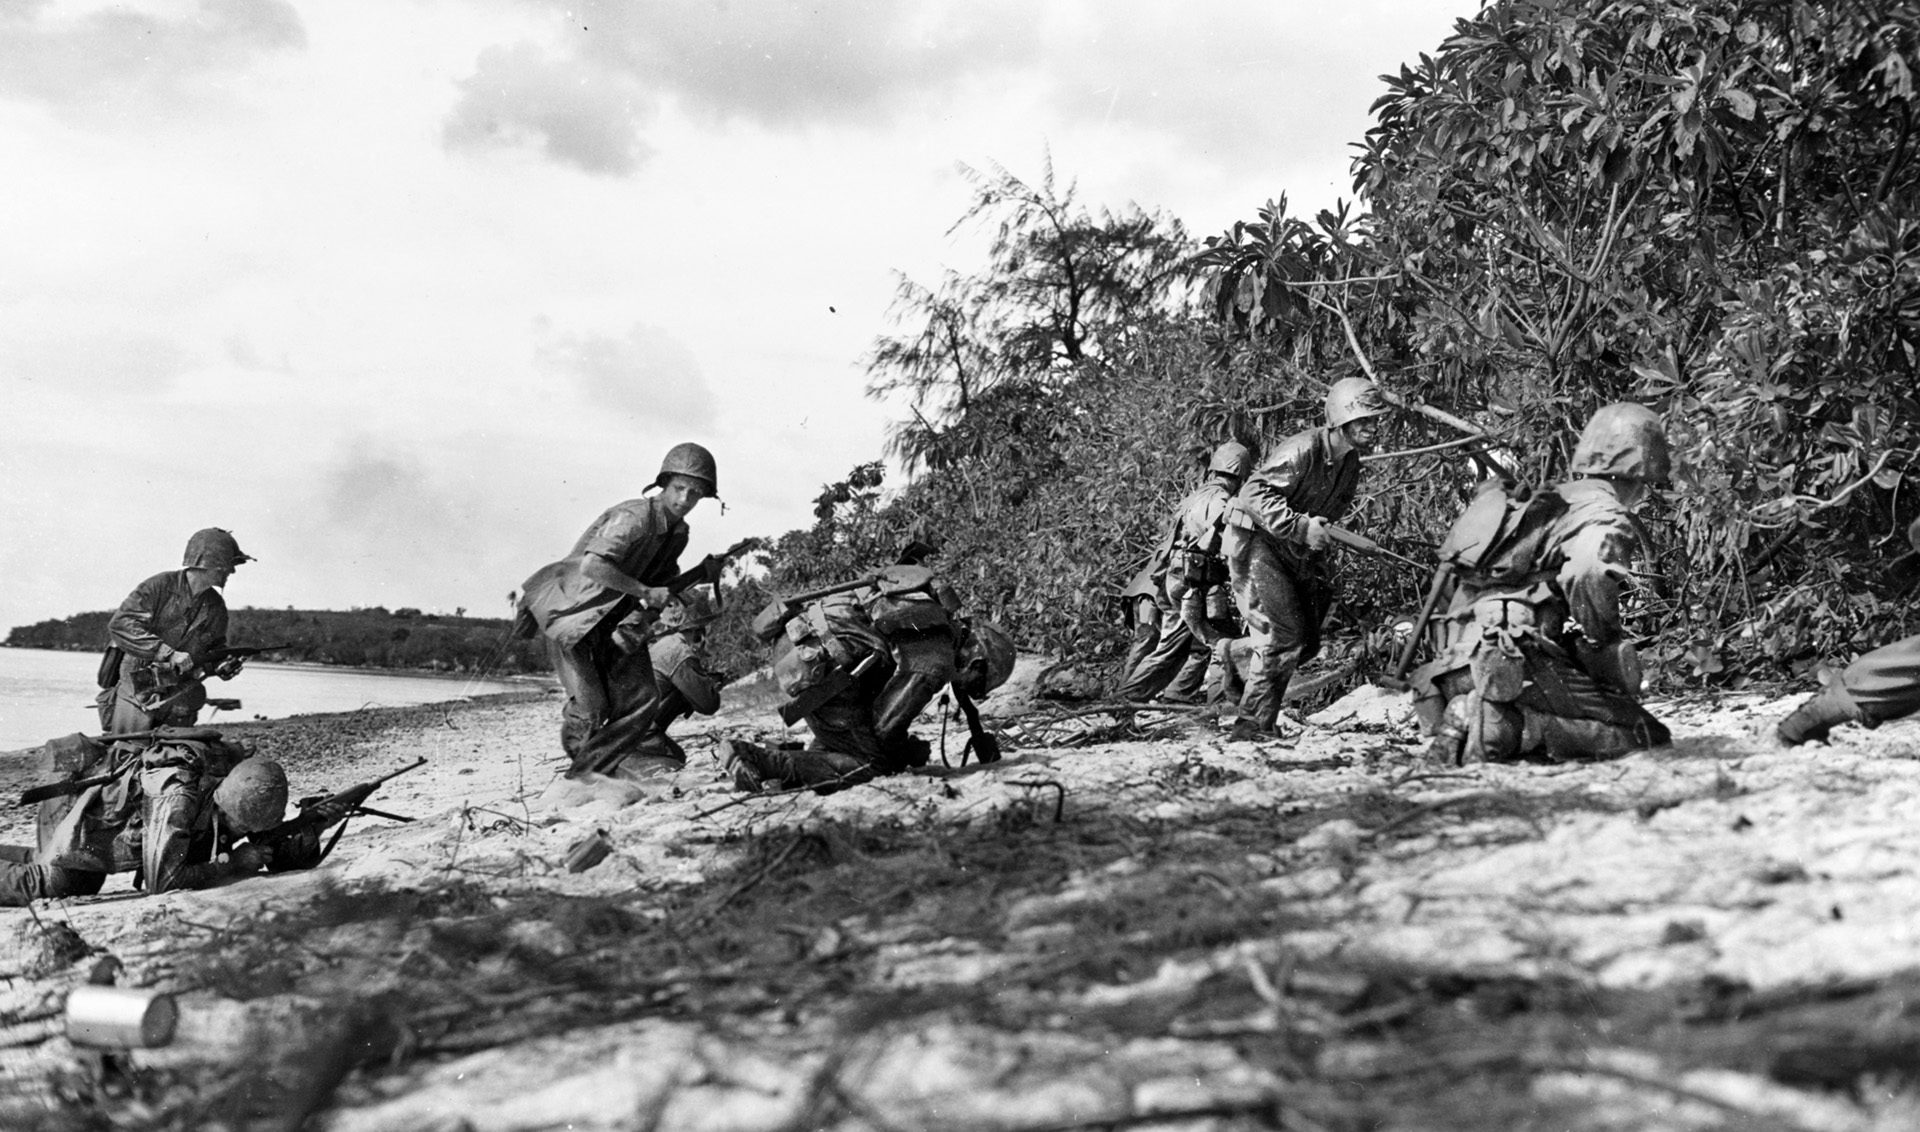  Two Marines (left and center) fall as they are hit by sniper fire while coming ashore.